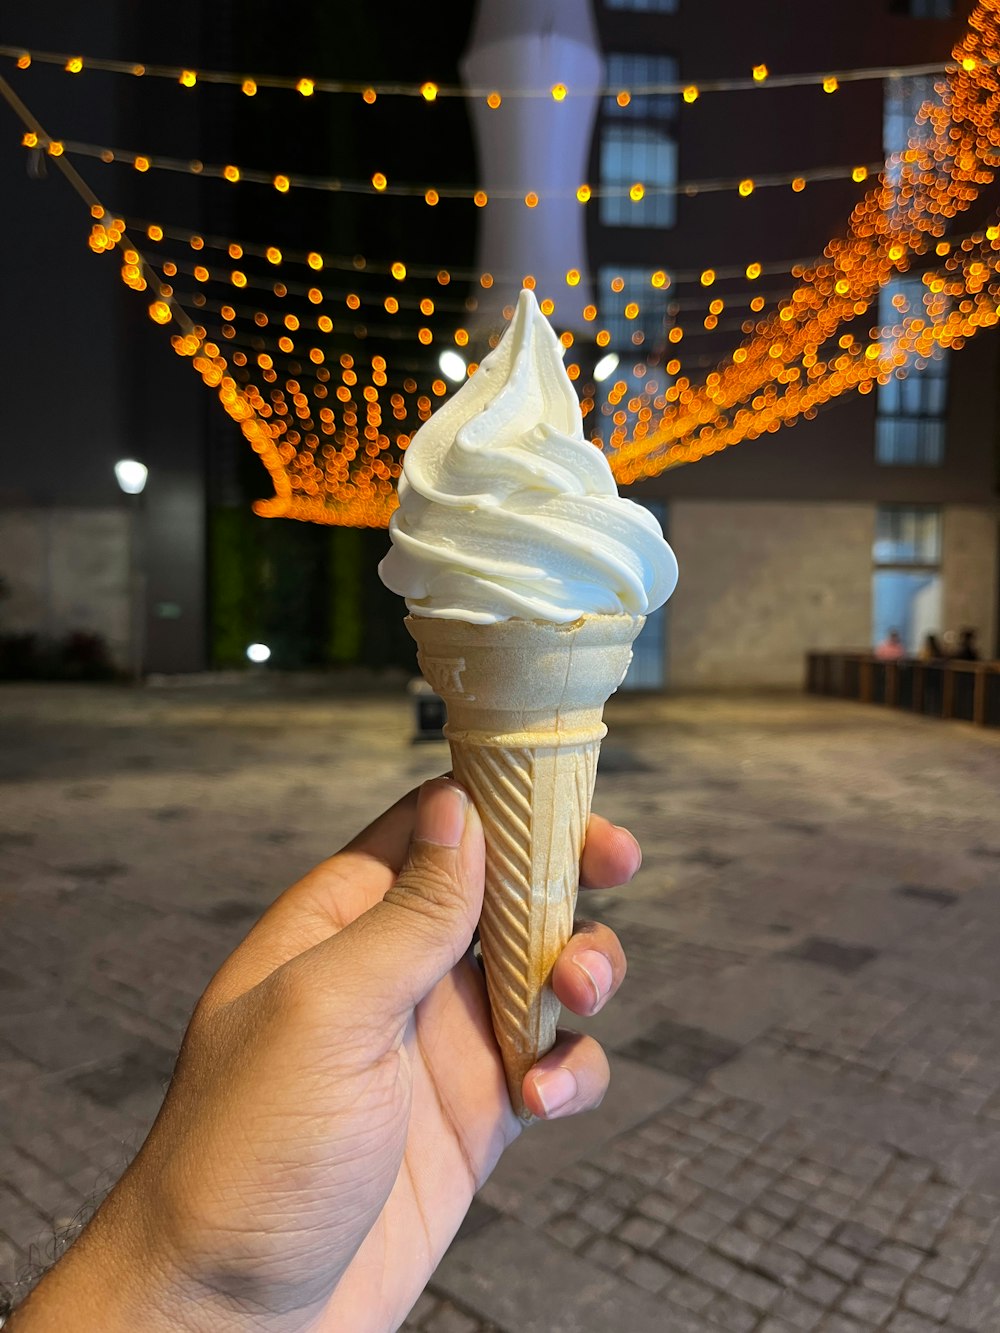 a hand holding an ice cream cone with a string of lights in the background